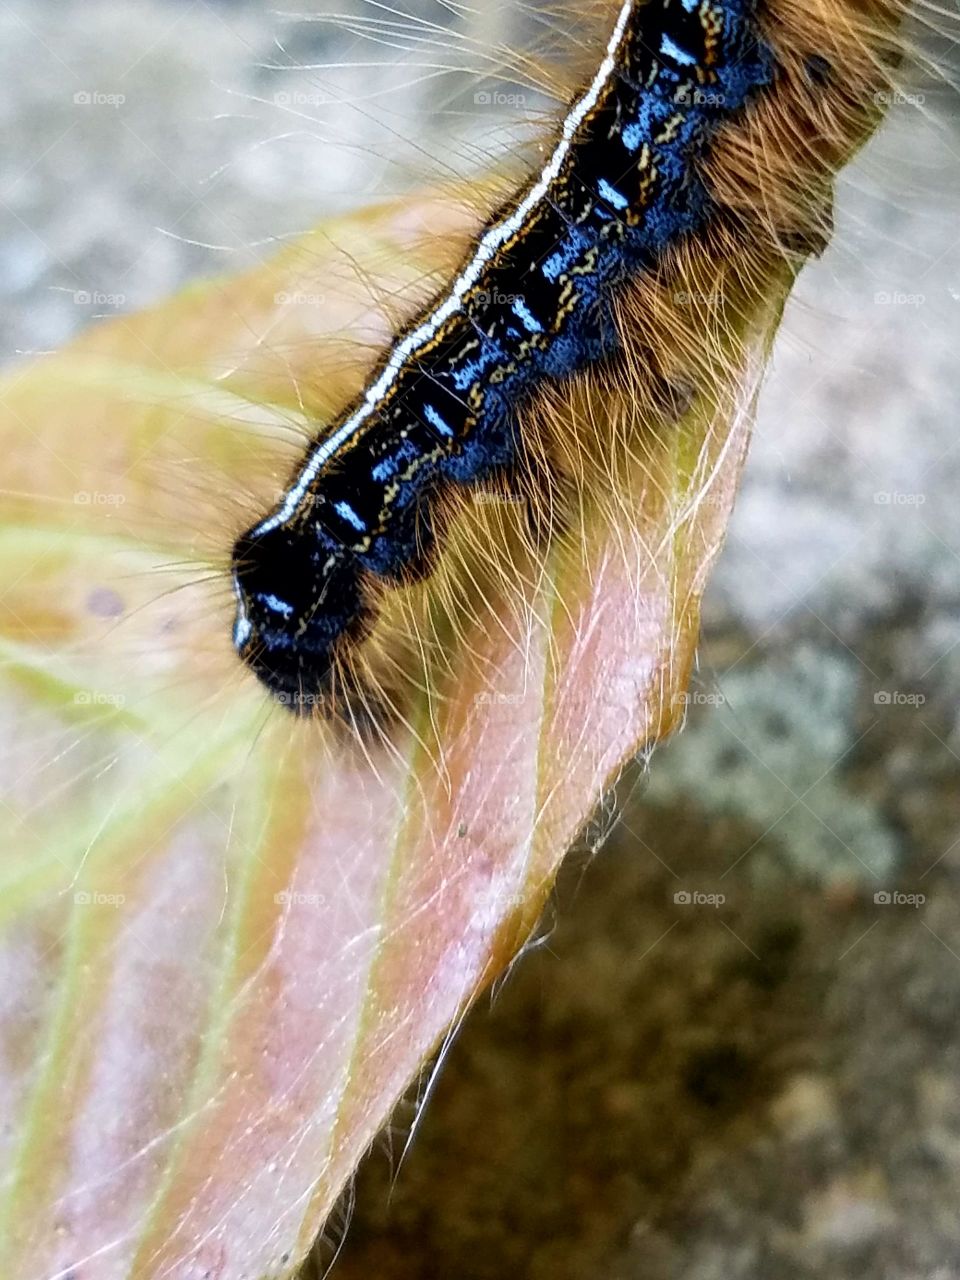 very hairy black shiny caterpillar crawling down light colored leaf, close-up